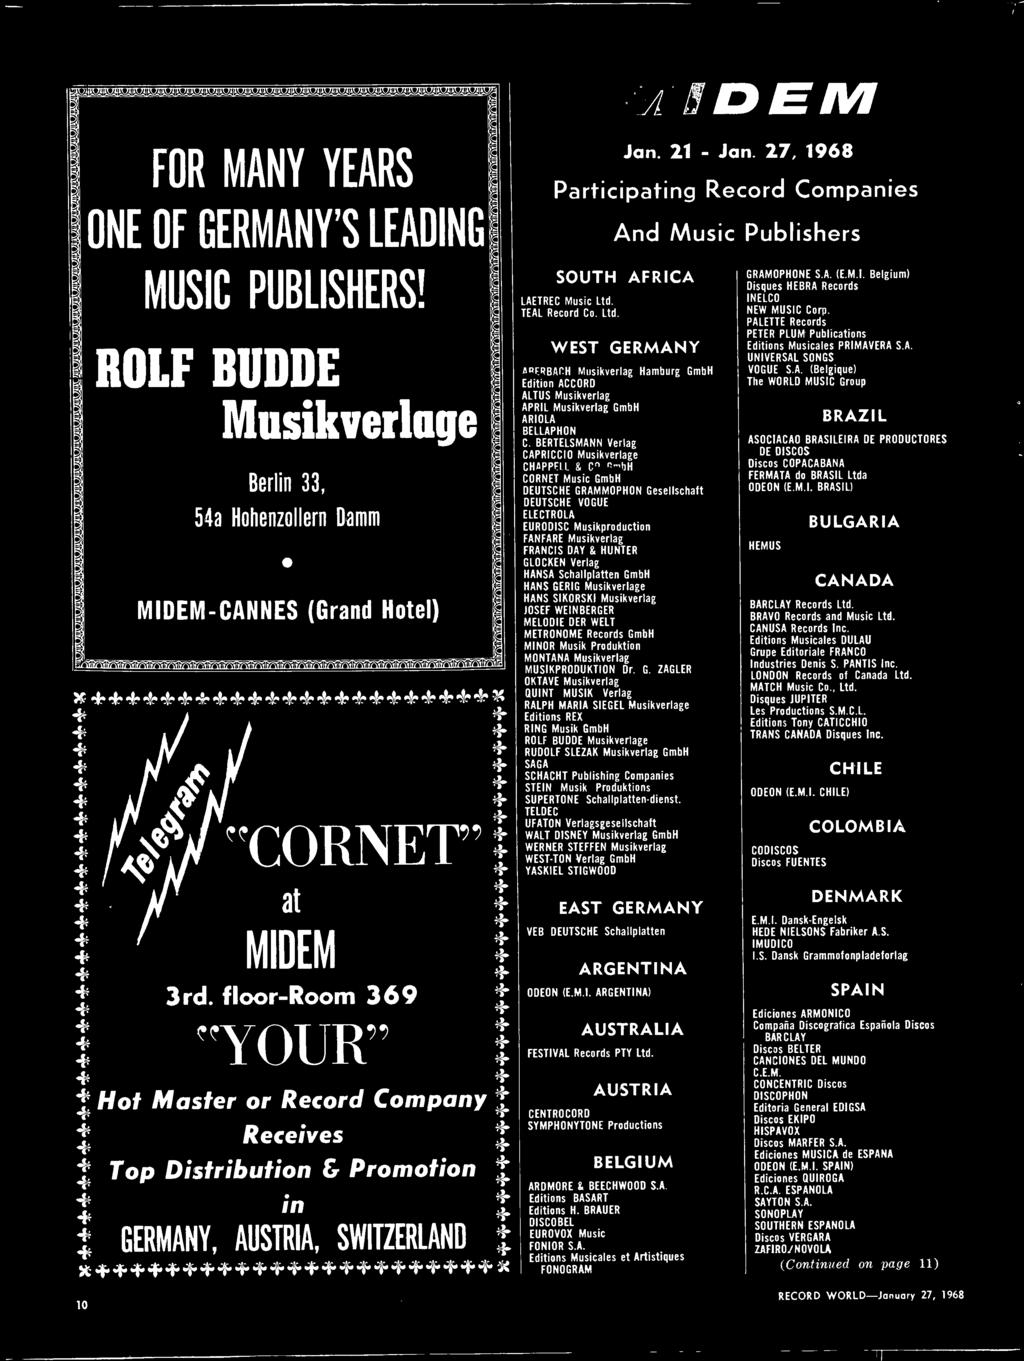 -Room 369 "YOUR" Hot Master or Record Company + Receives -41 + Top Distribution & Promotion + in + I: GERMANY, AUSTRIA, SWITZERLAND + x+++++++++++++++++++++++* ++++` +ß`Ìr* 10 Jan 21 - Jan 27, 1968